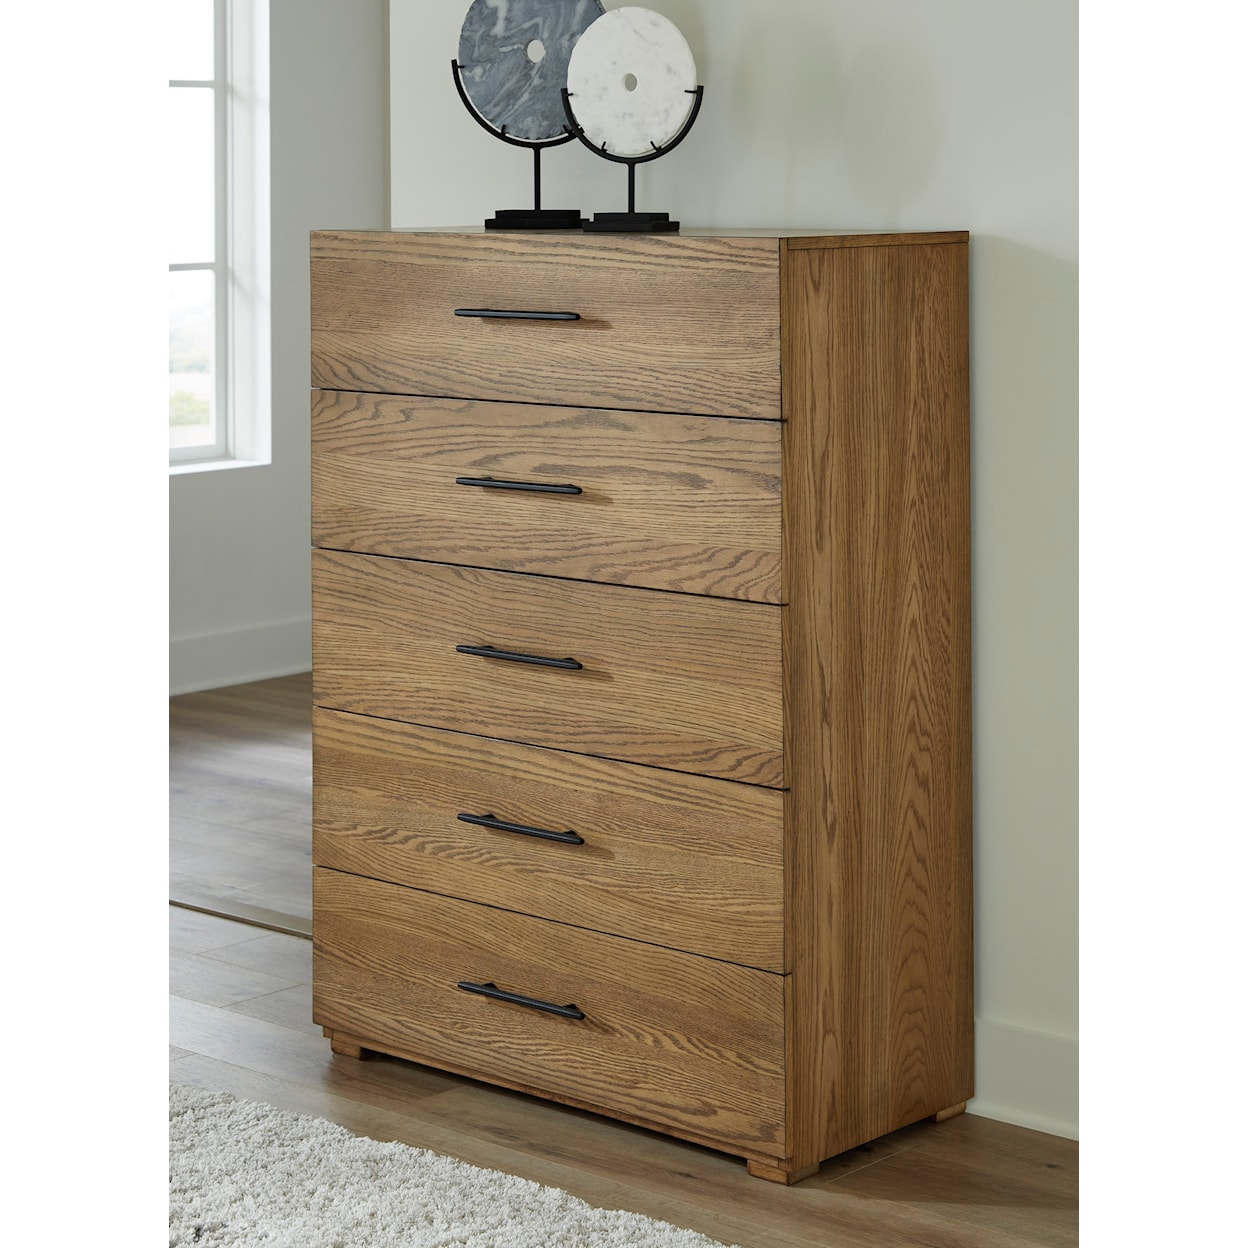 Signature Design by Ashley Dakmore Chest of Drawers